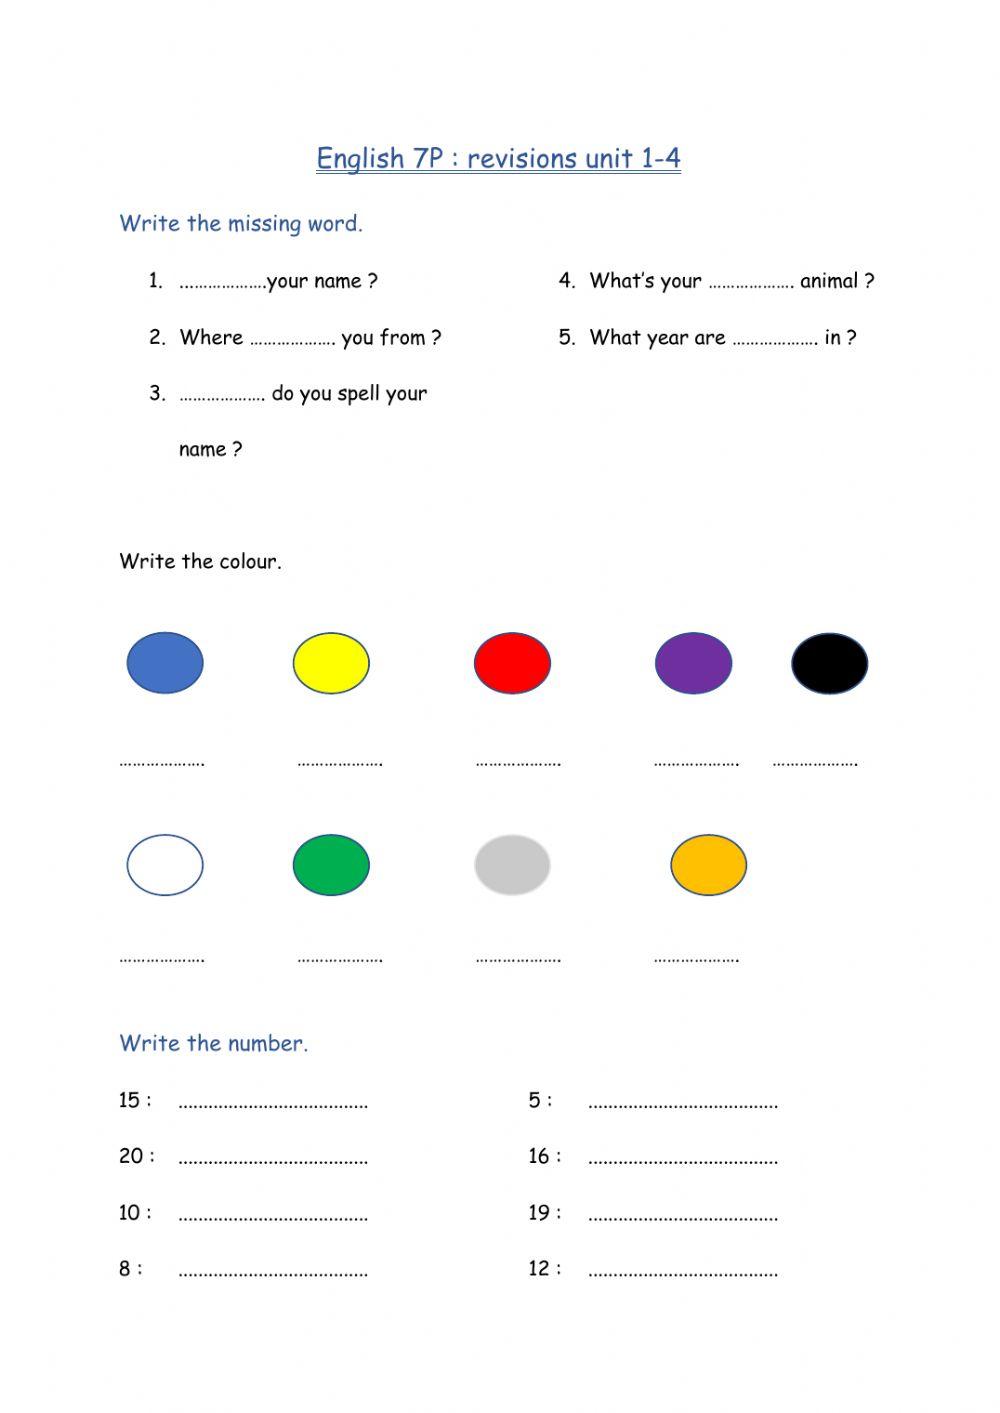 Questions, colours, numbers 1-20